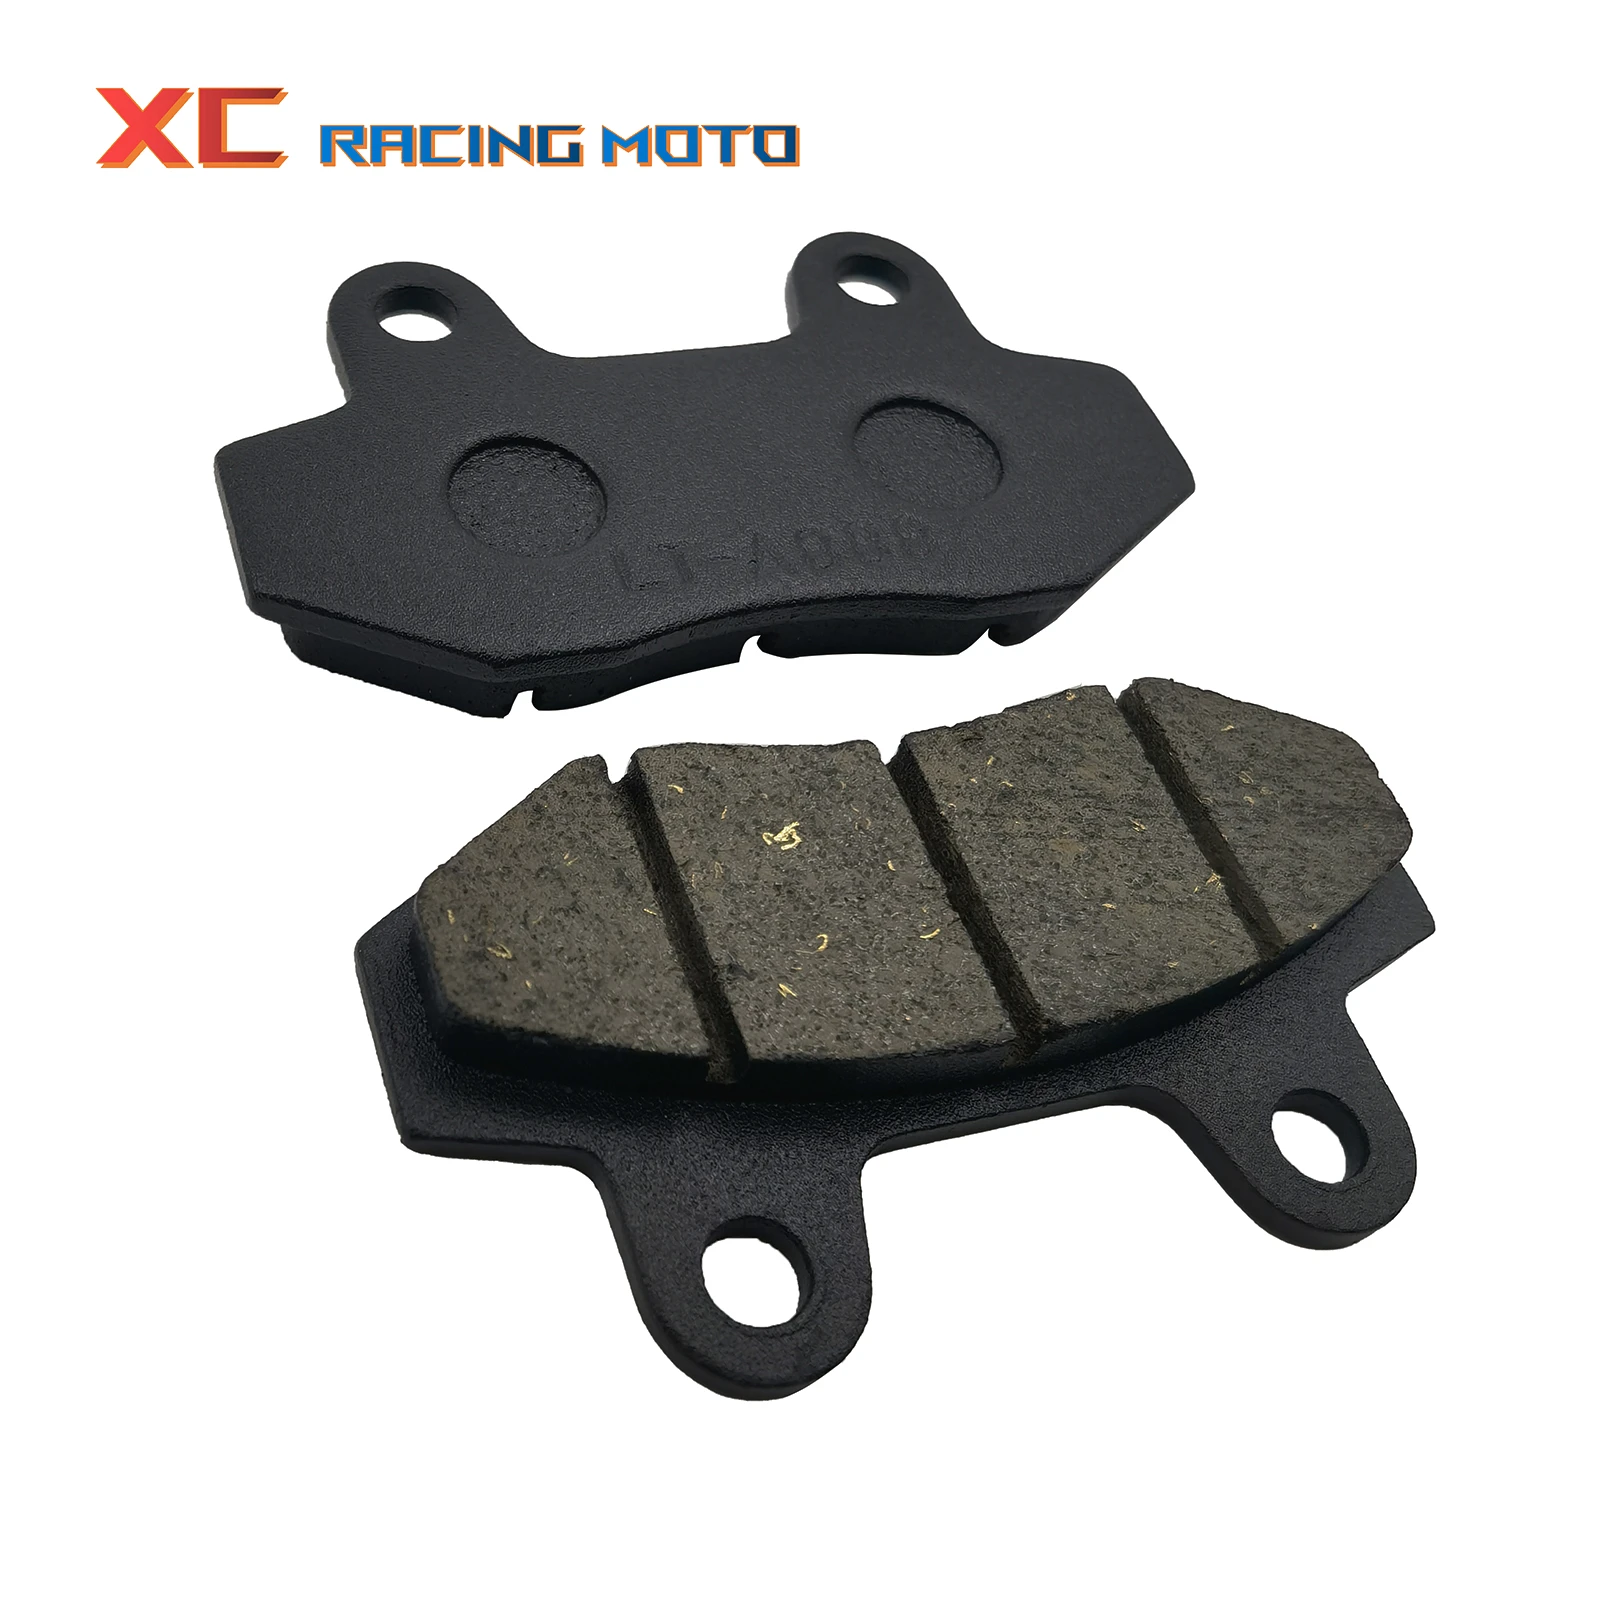 Copper Rear Brake Pads For Gy6 Scooter Moped Atv 50cc 70cc-1